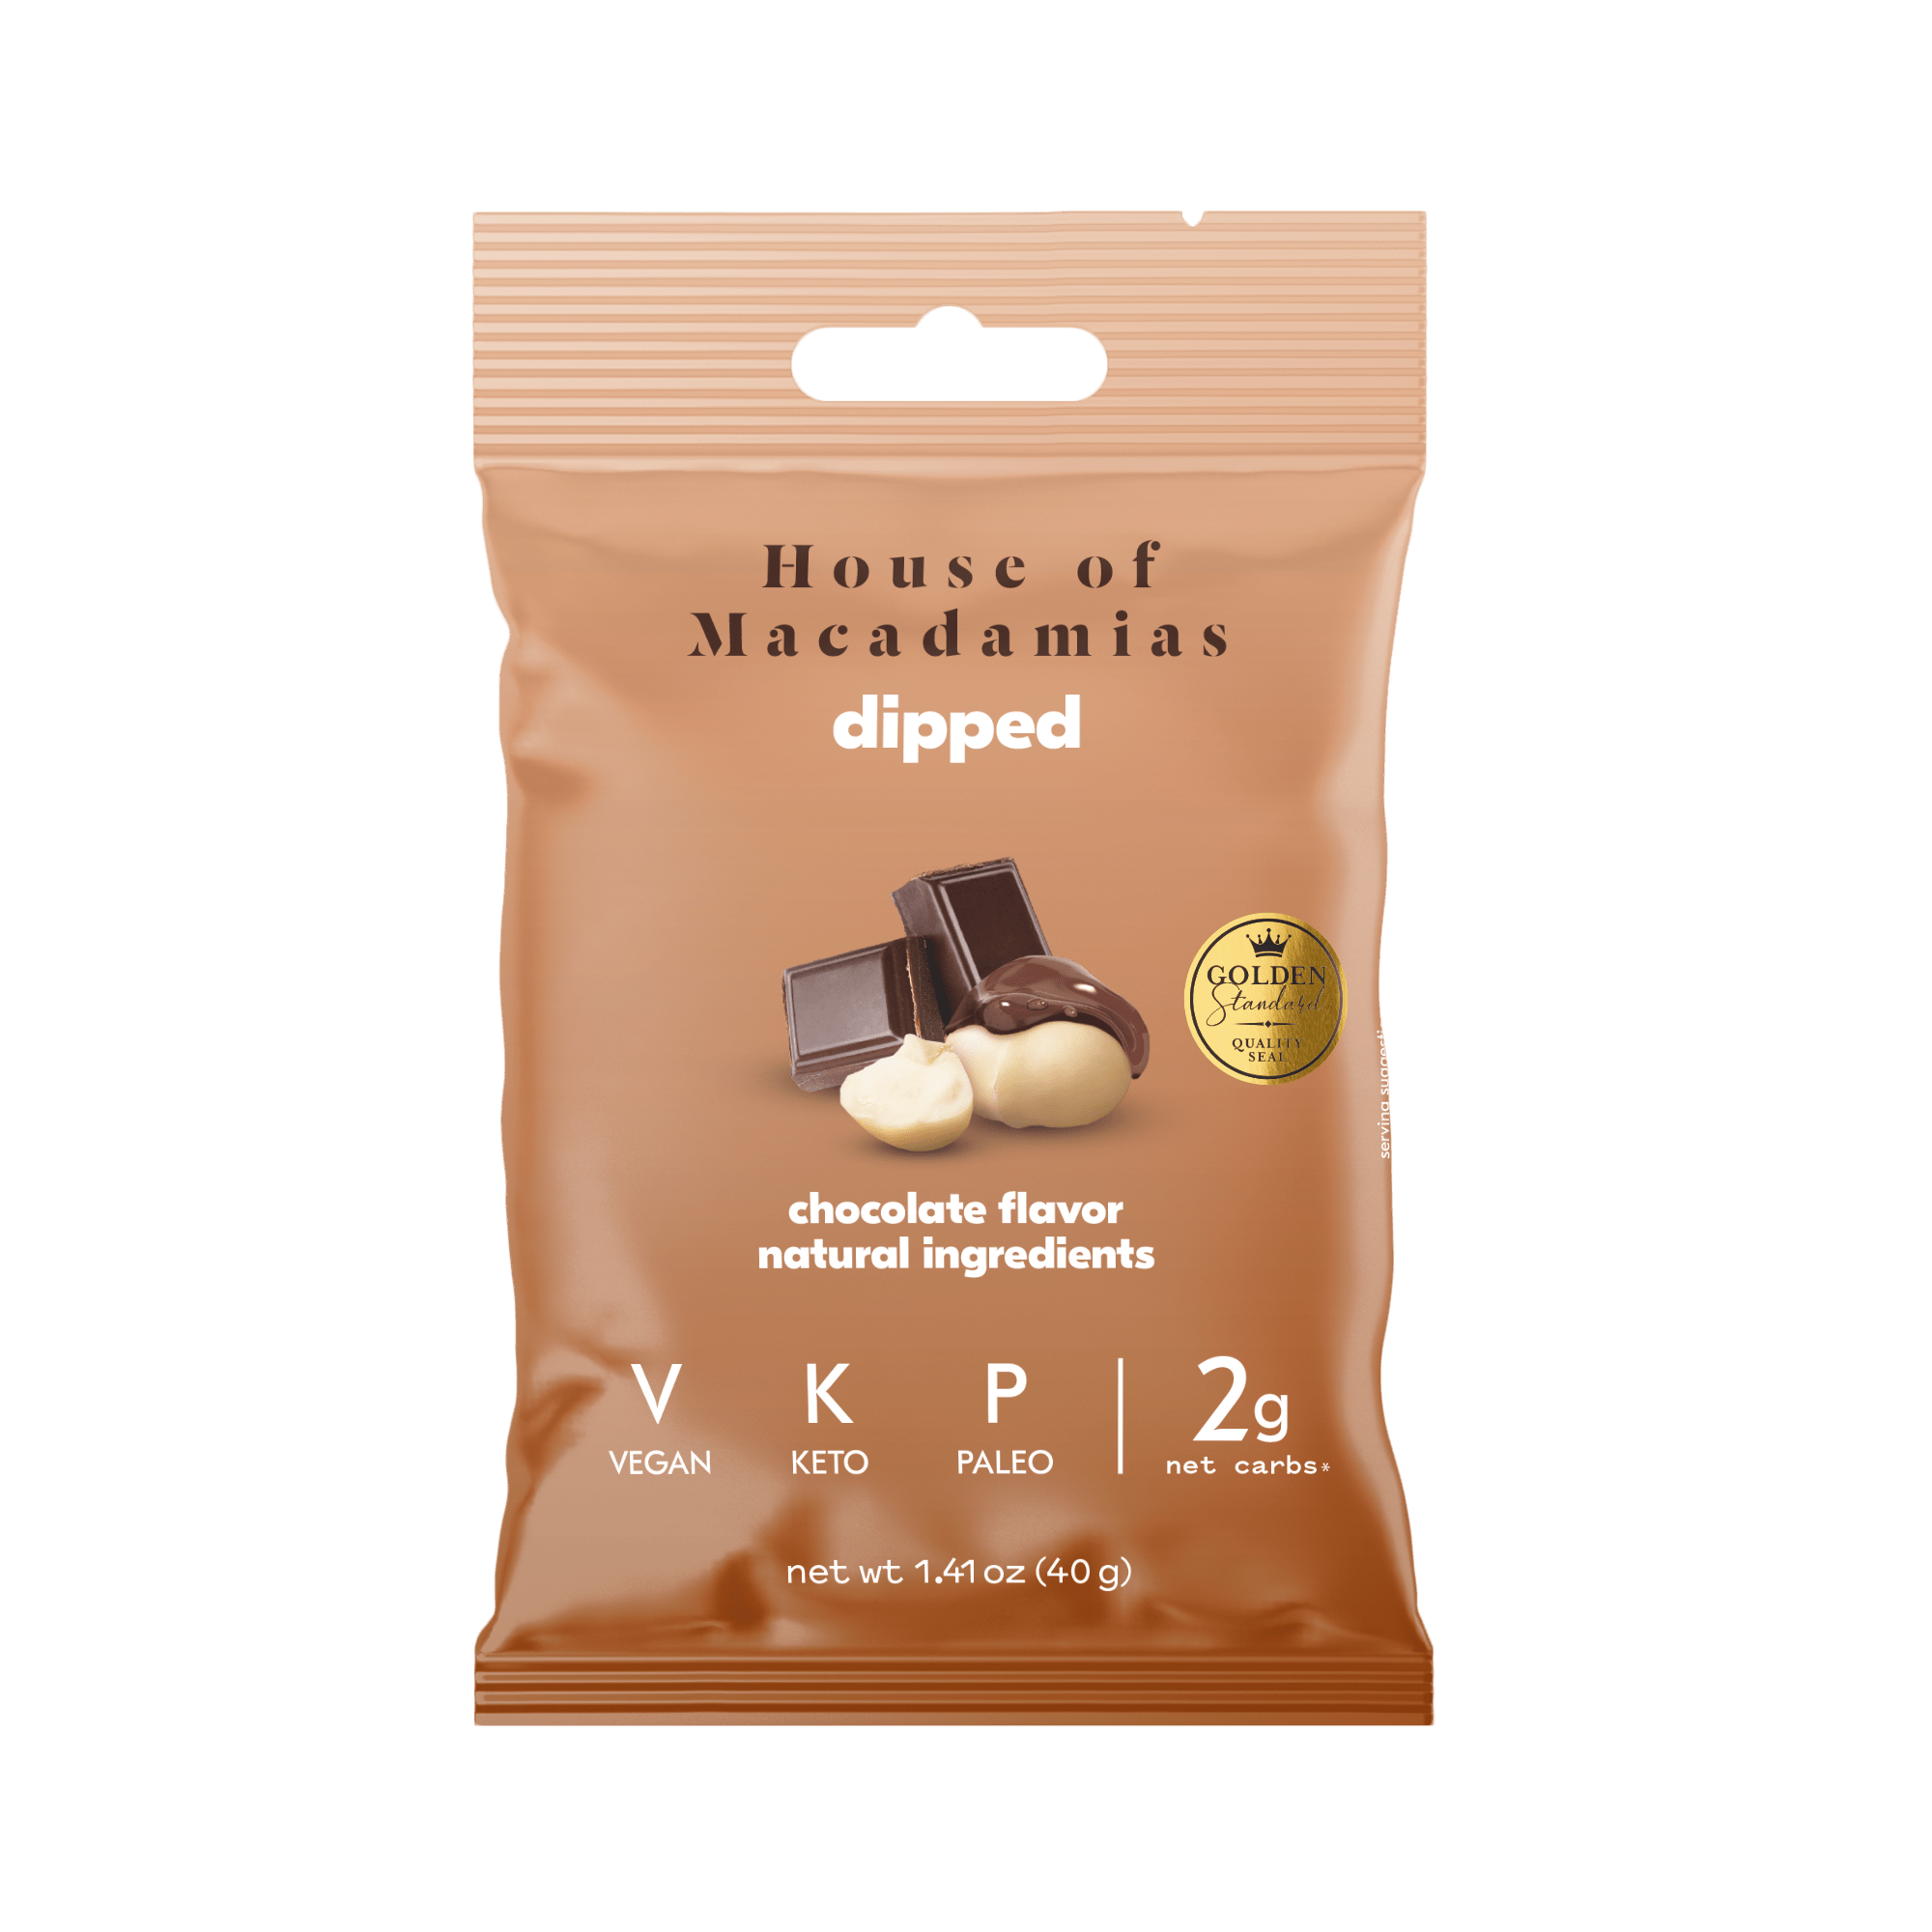 Macadamia Nut Variety Pack (6 Flavors, 12 Bags) - House of Macadamias - whole nut